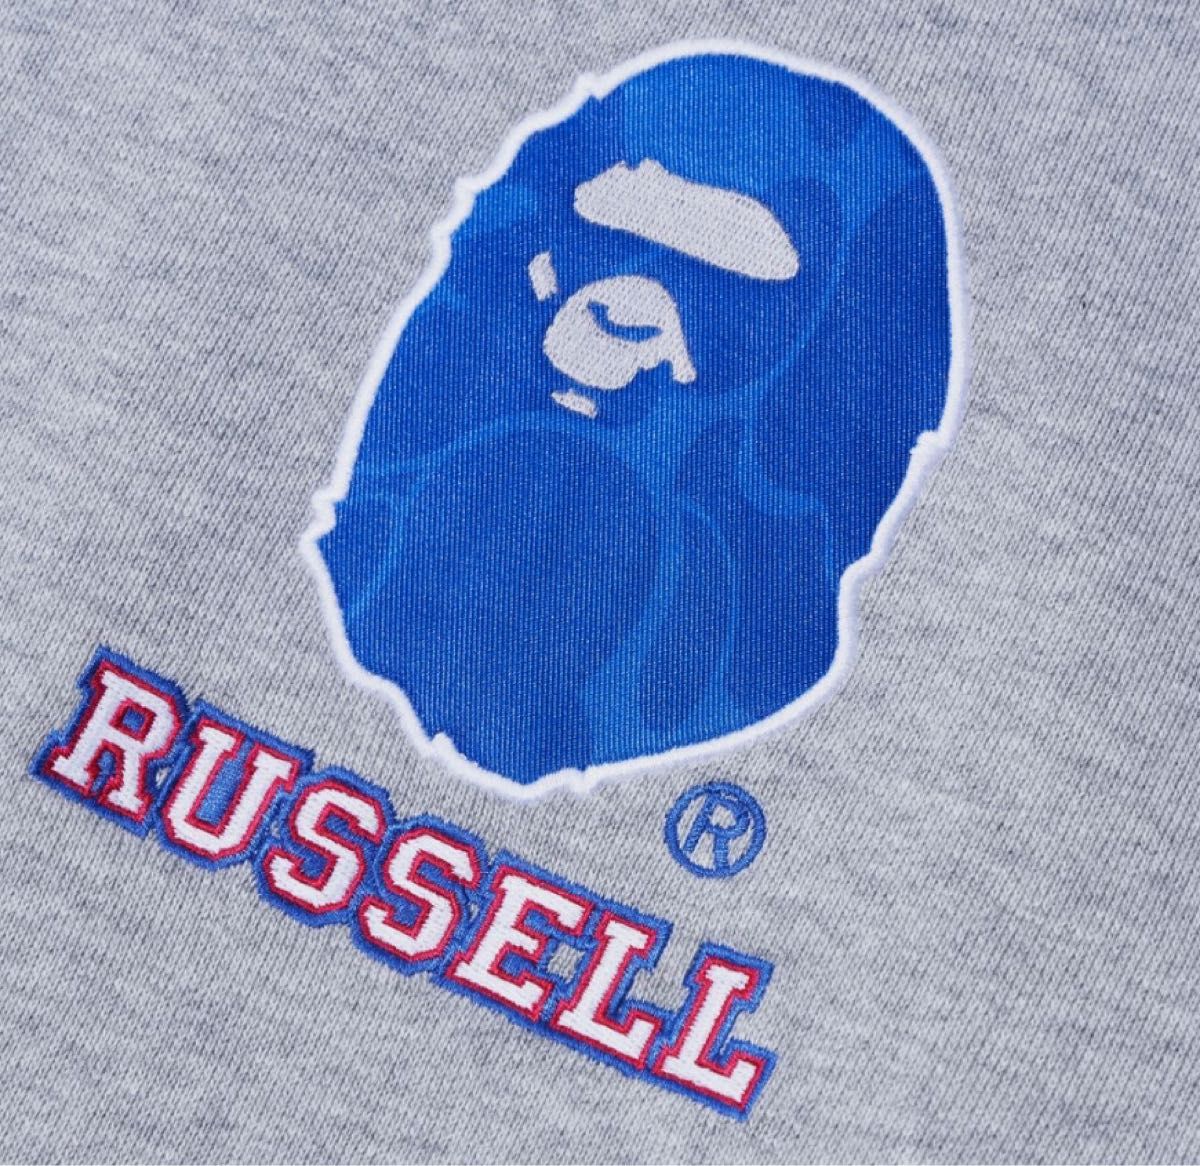  BAPE X RUSSELL 】PULLOVER HOODIE アベイシングエイプ